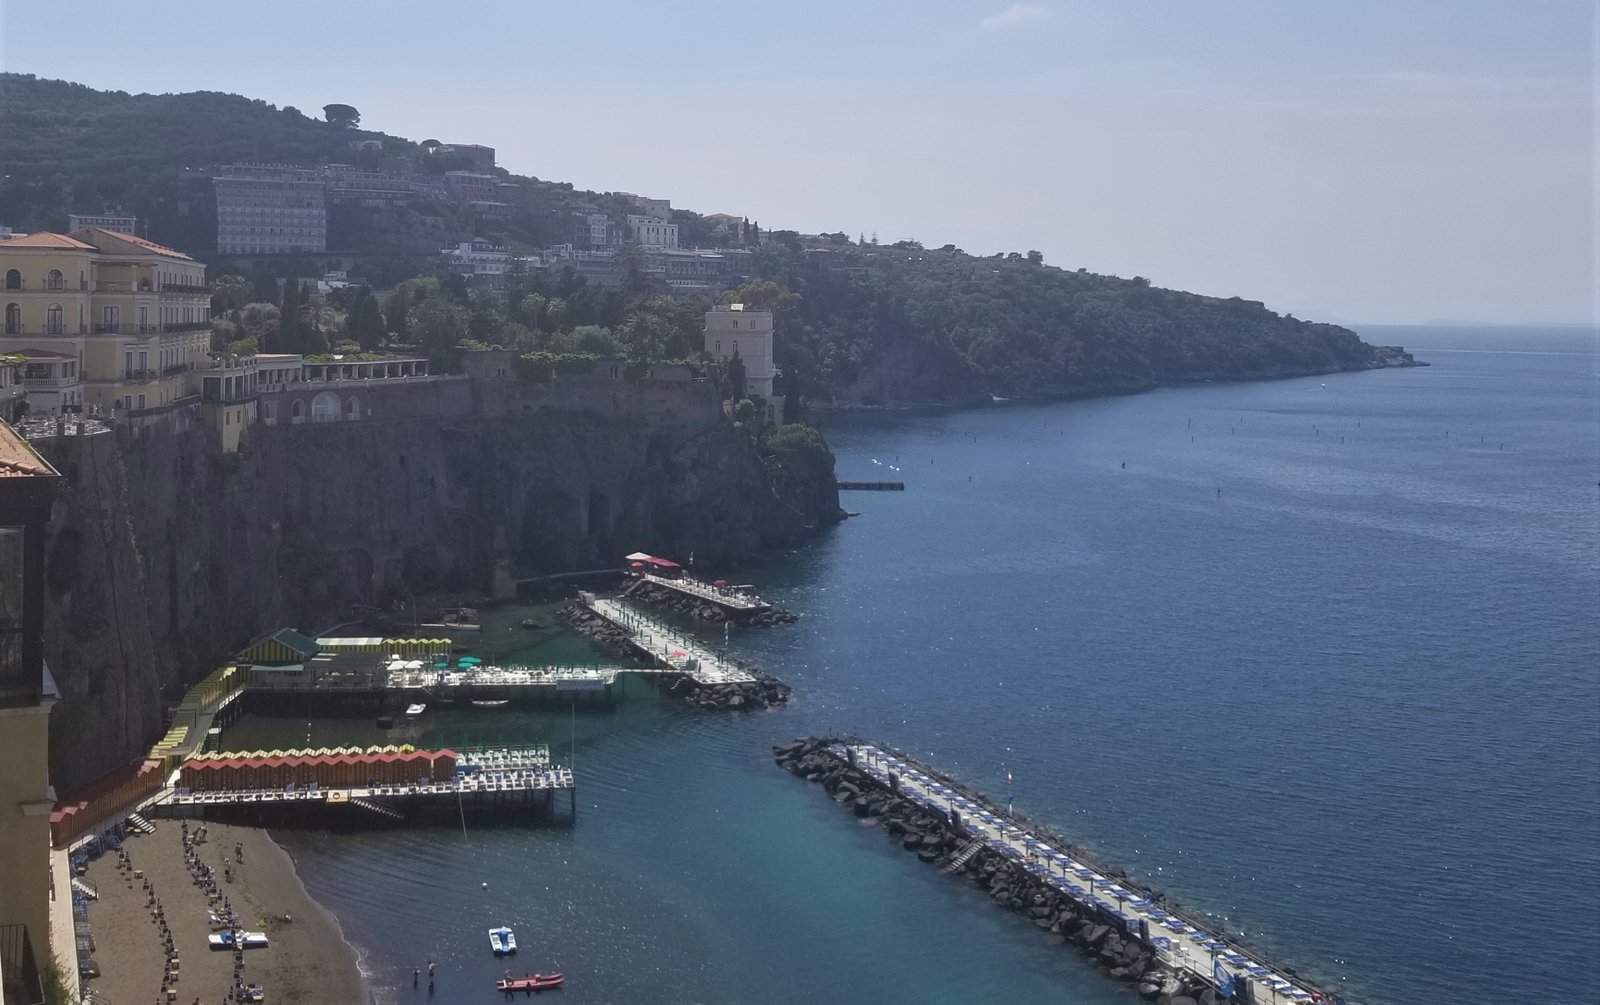 Town of Sorrento, Italy, Months 7&8, our one year adventure through Italy. Close to Amalfi Coast. Highlights from months 7 & 8, ouritalianjourney.com,